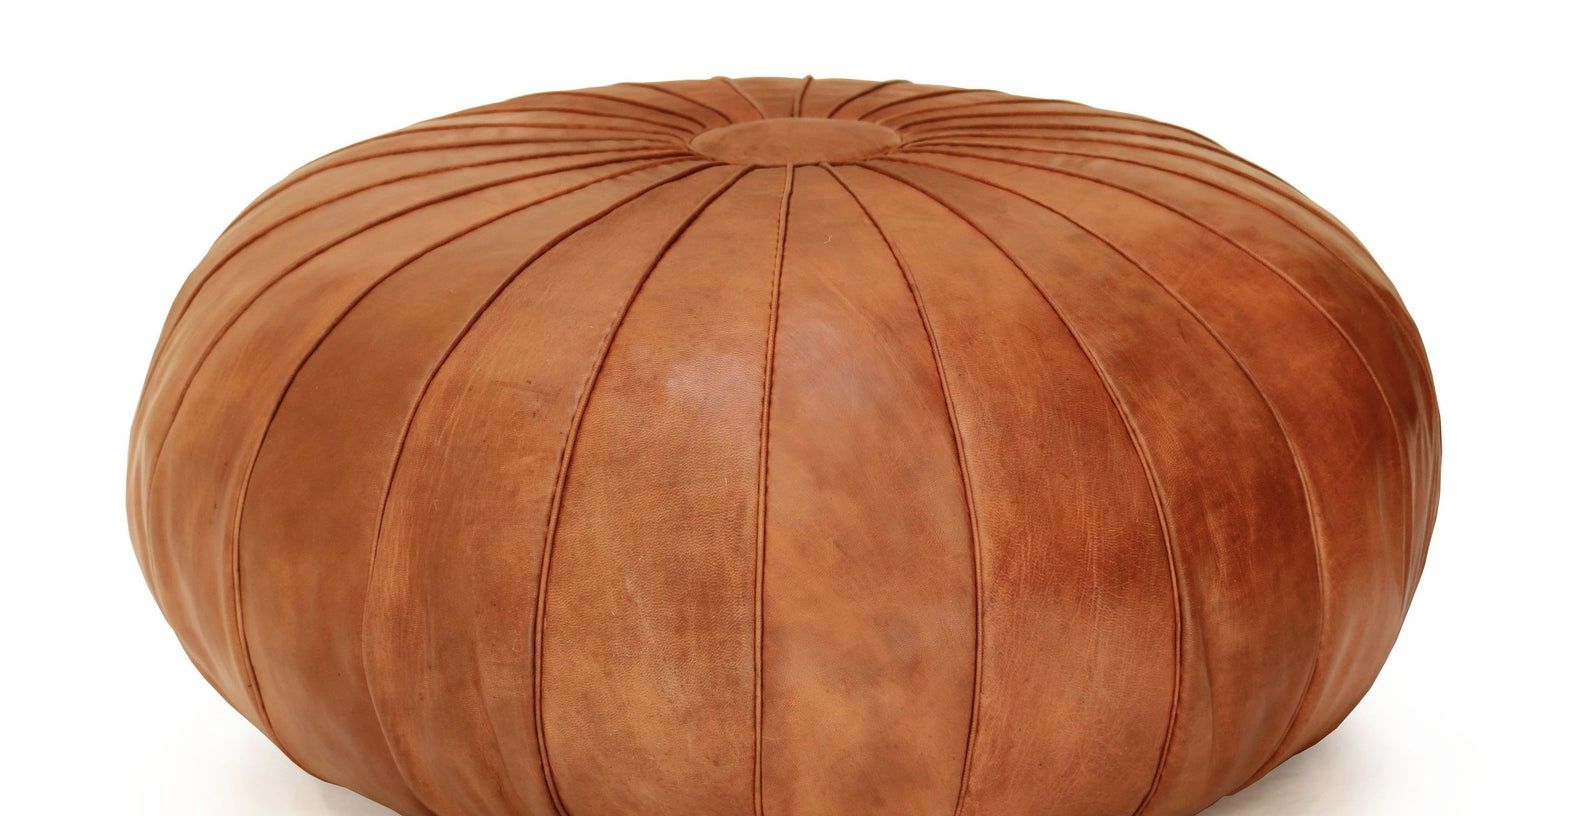 Round Stunning Light Brown Leather Moroccan Pouf Ottoman | Etsy For Gray Moroccan Inspired Pouf Ottomans (View 10 of 20)